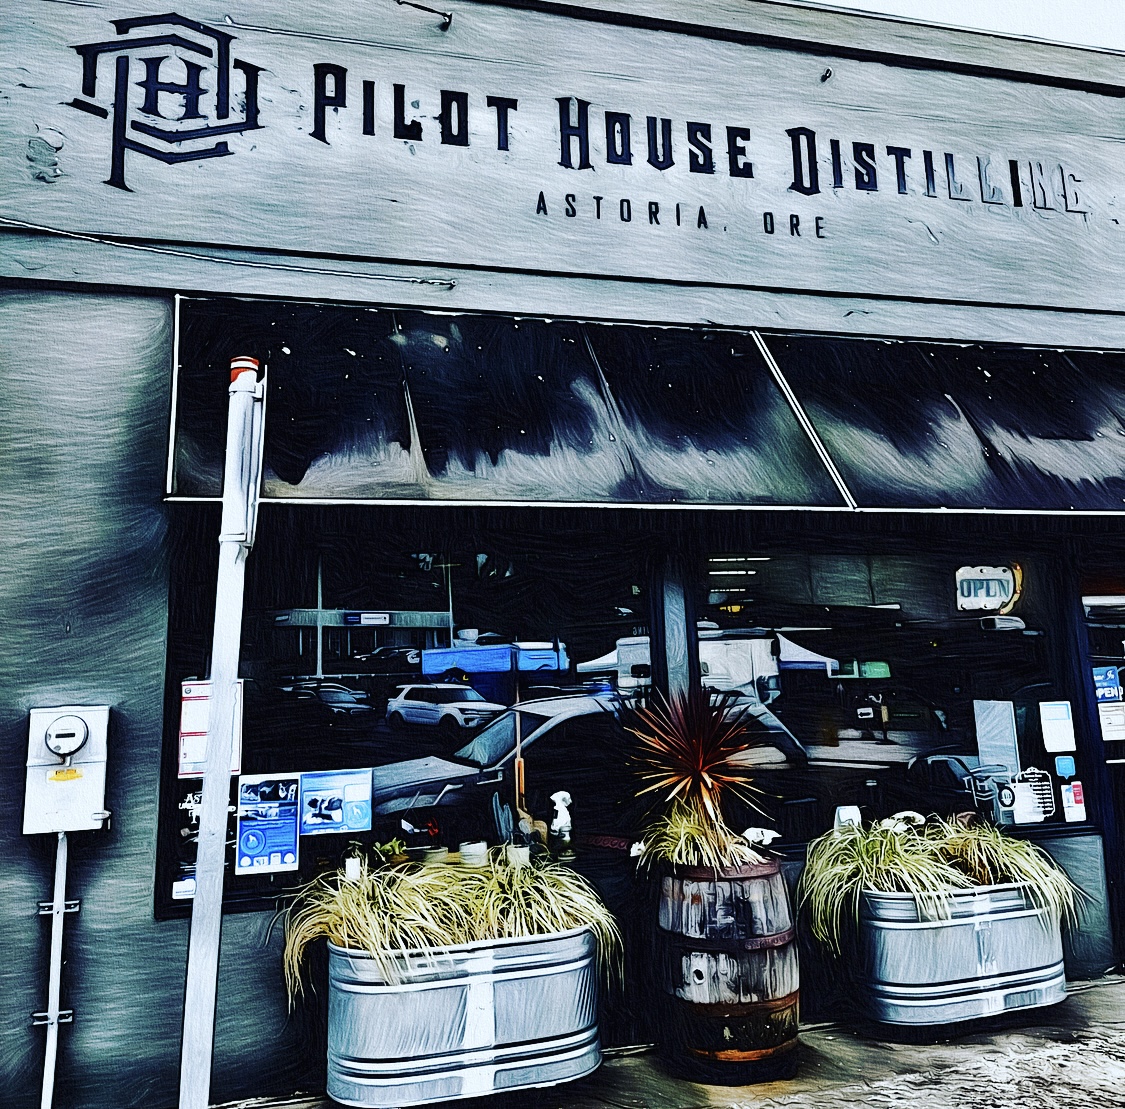 Larry Cary Pilot House Distilling – Culinary Treasure Podcast Episode 84 by Steven Shomler 